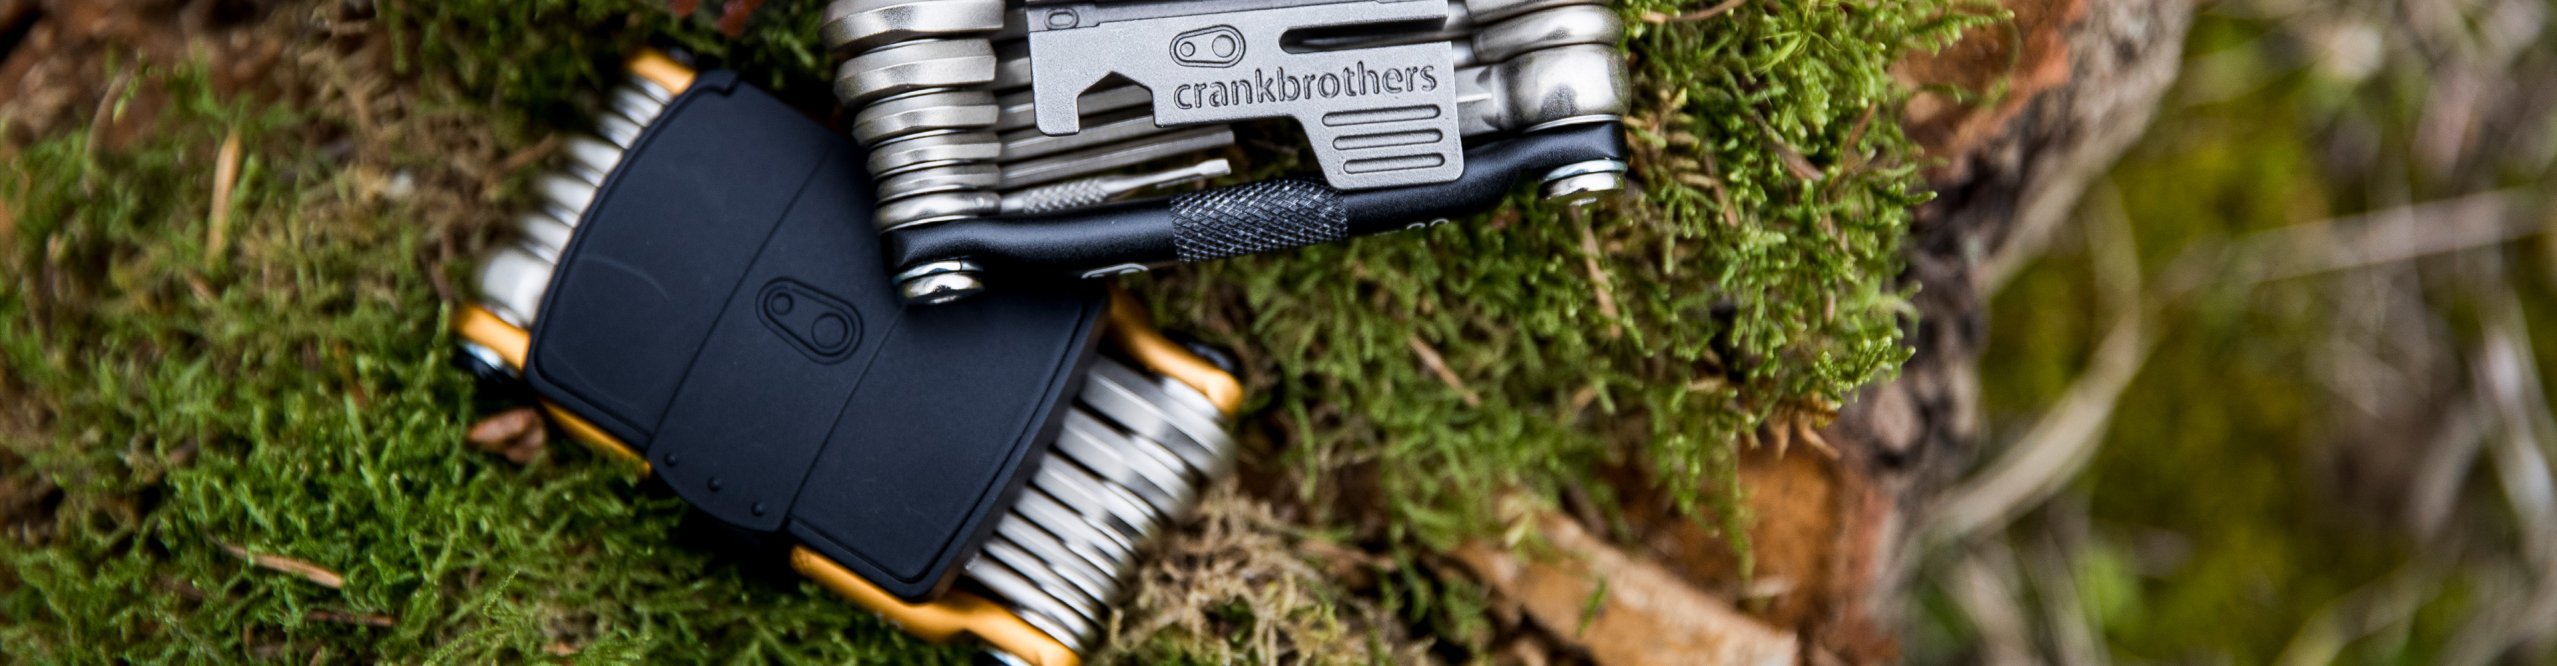 crankbrothers Outil Multifonctions M17 - bike-components